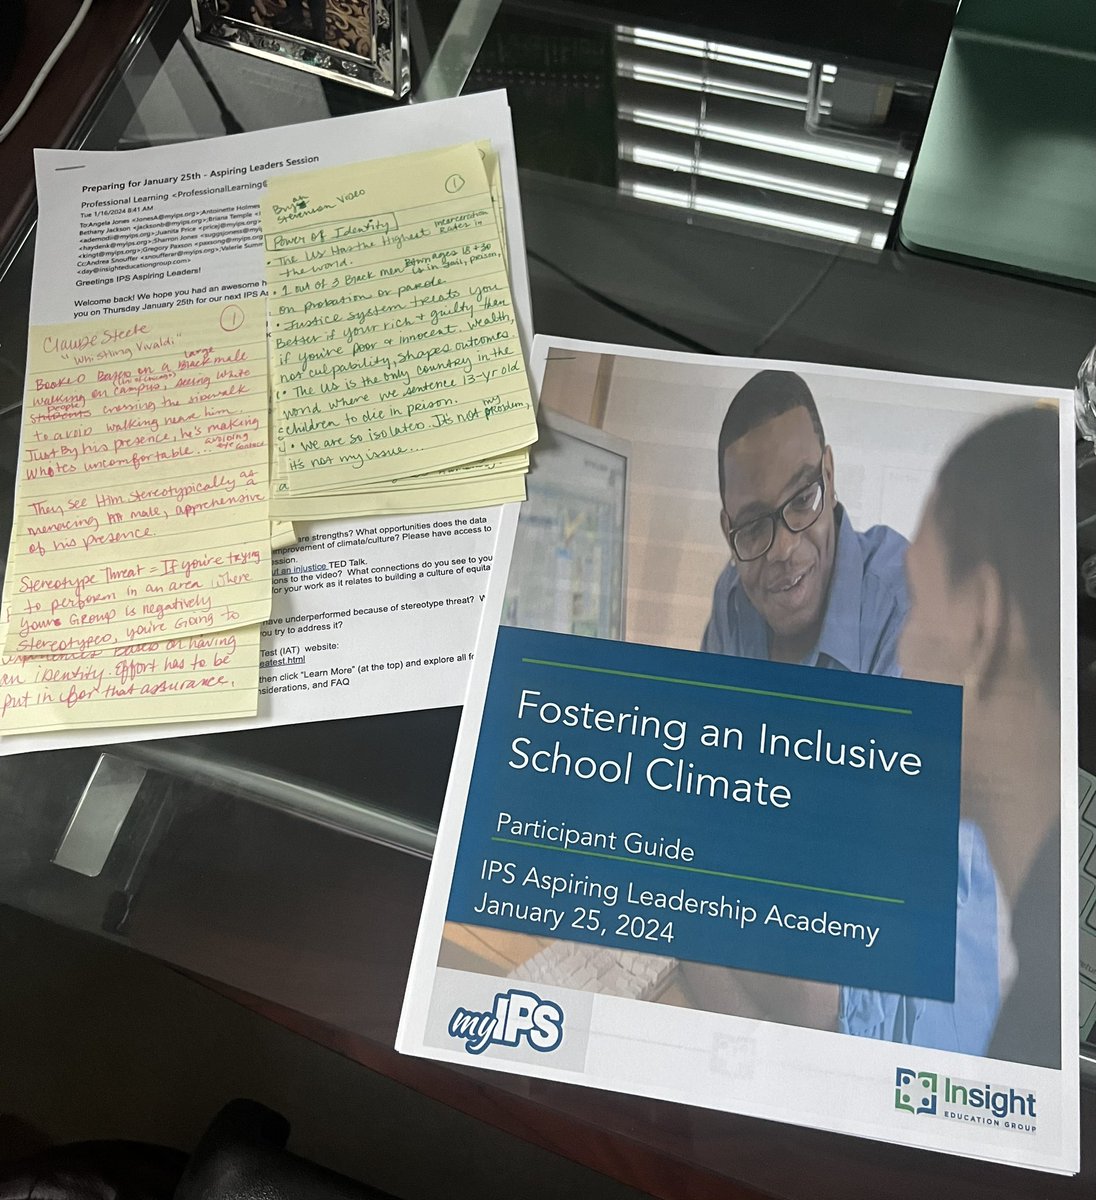 Today’s IPS Aspiring Leader’s session focuses on “Fostering an Inclusive School Climate”. So much to unpack as we discuss building an effective school team & racial identity with its’ impact on school culture inclusivity. Let’s go!!! #PWP #WatchUsWork @pwp_ips @IPSSchools